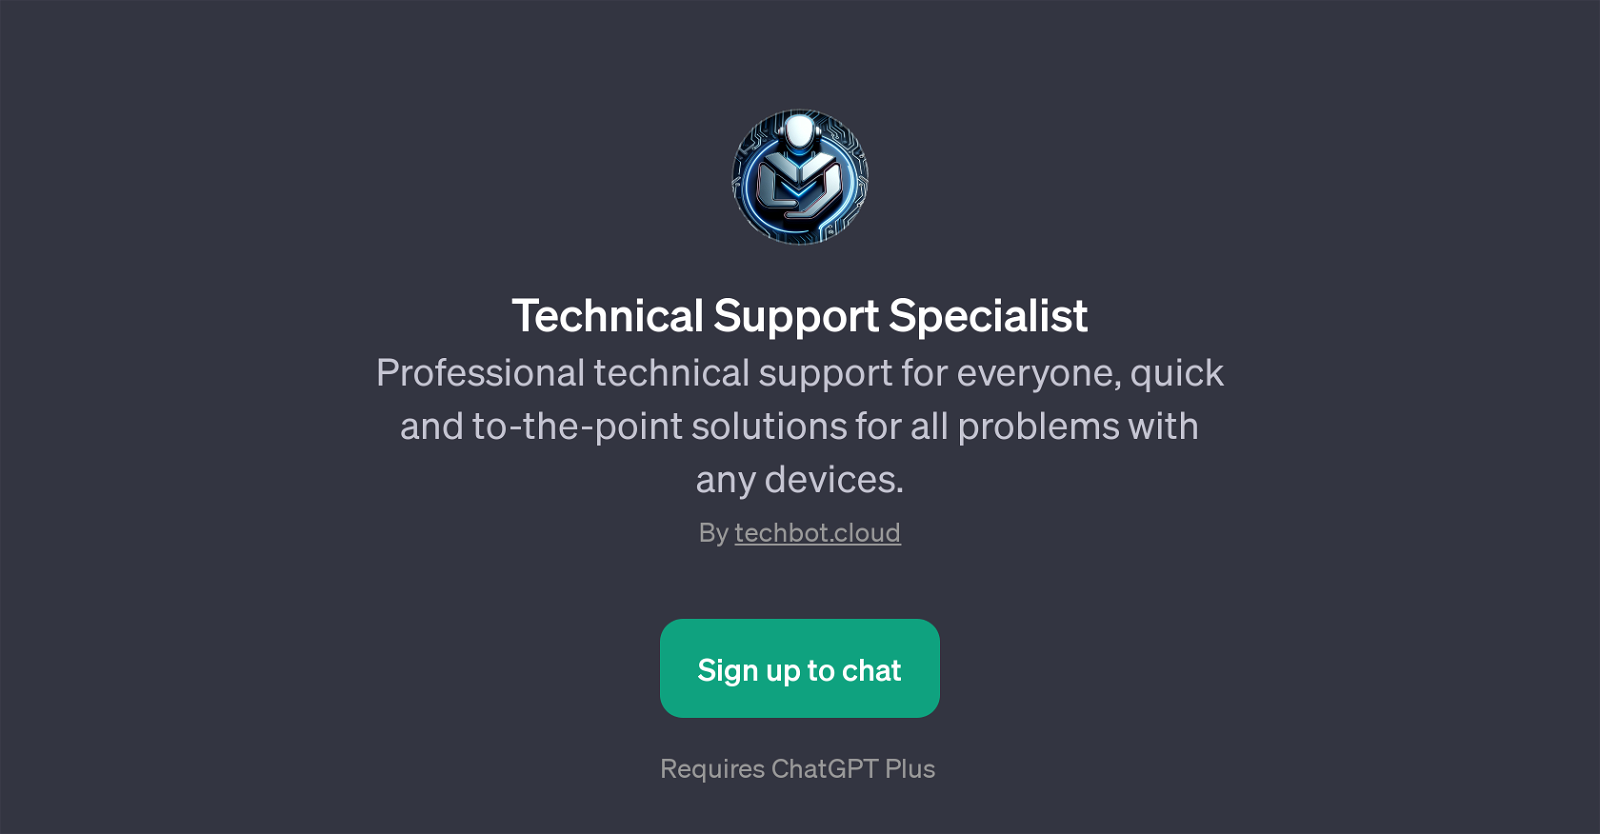 Technical Support Specialist website